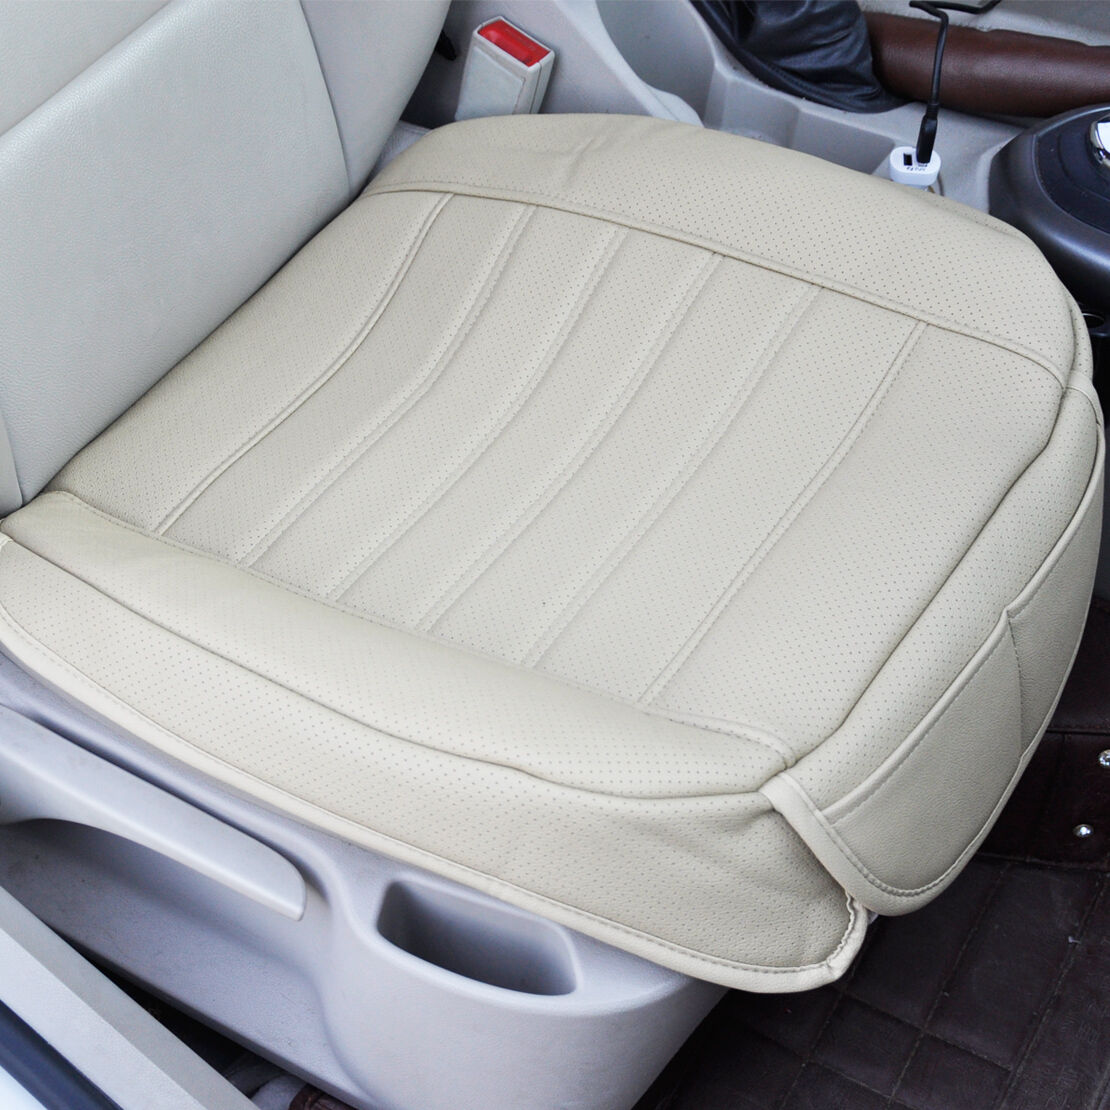 New Universal Beige Car Front Seat Cover Breathable PU leather Seat pad Cushion